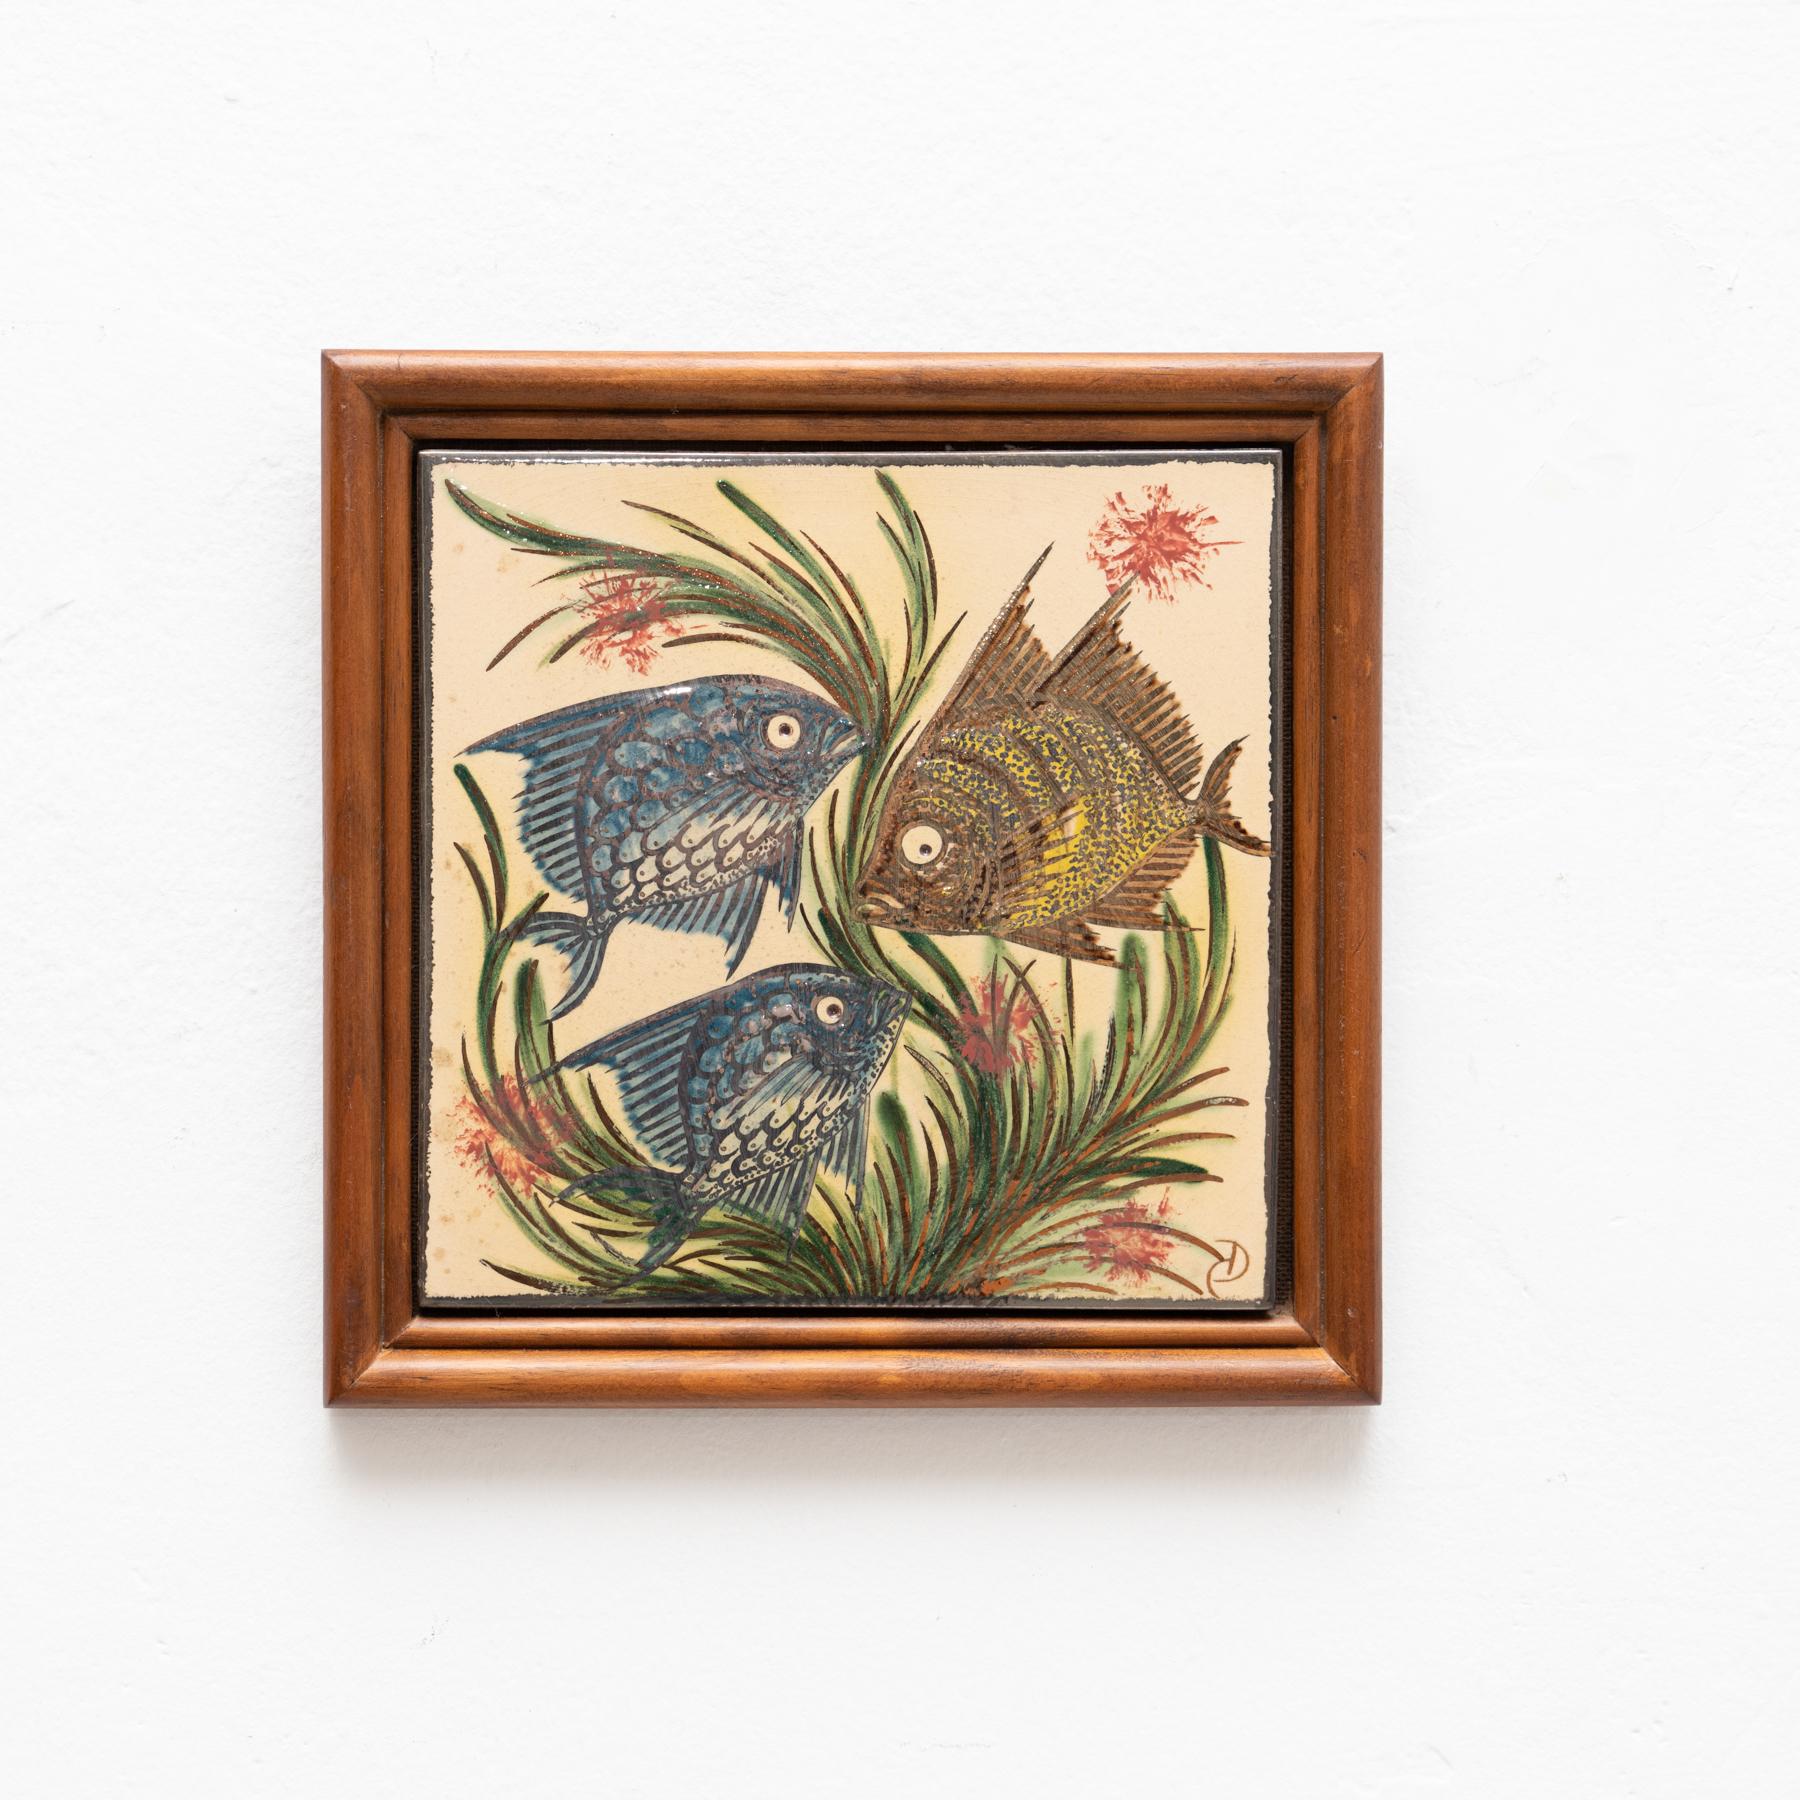 Ceramic hand painted artwork of three fishes design by Catalan artist Diaz Costa, circa 1960.
Framed. Signed.

In original condition, with minor wear consistent of age and use, preserving a beautiul patina.